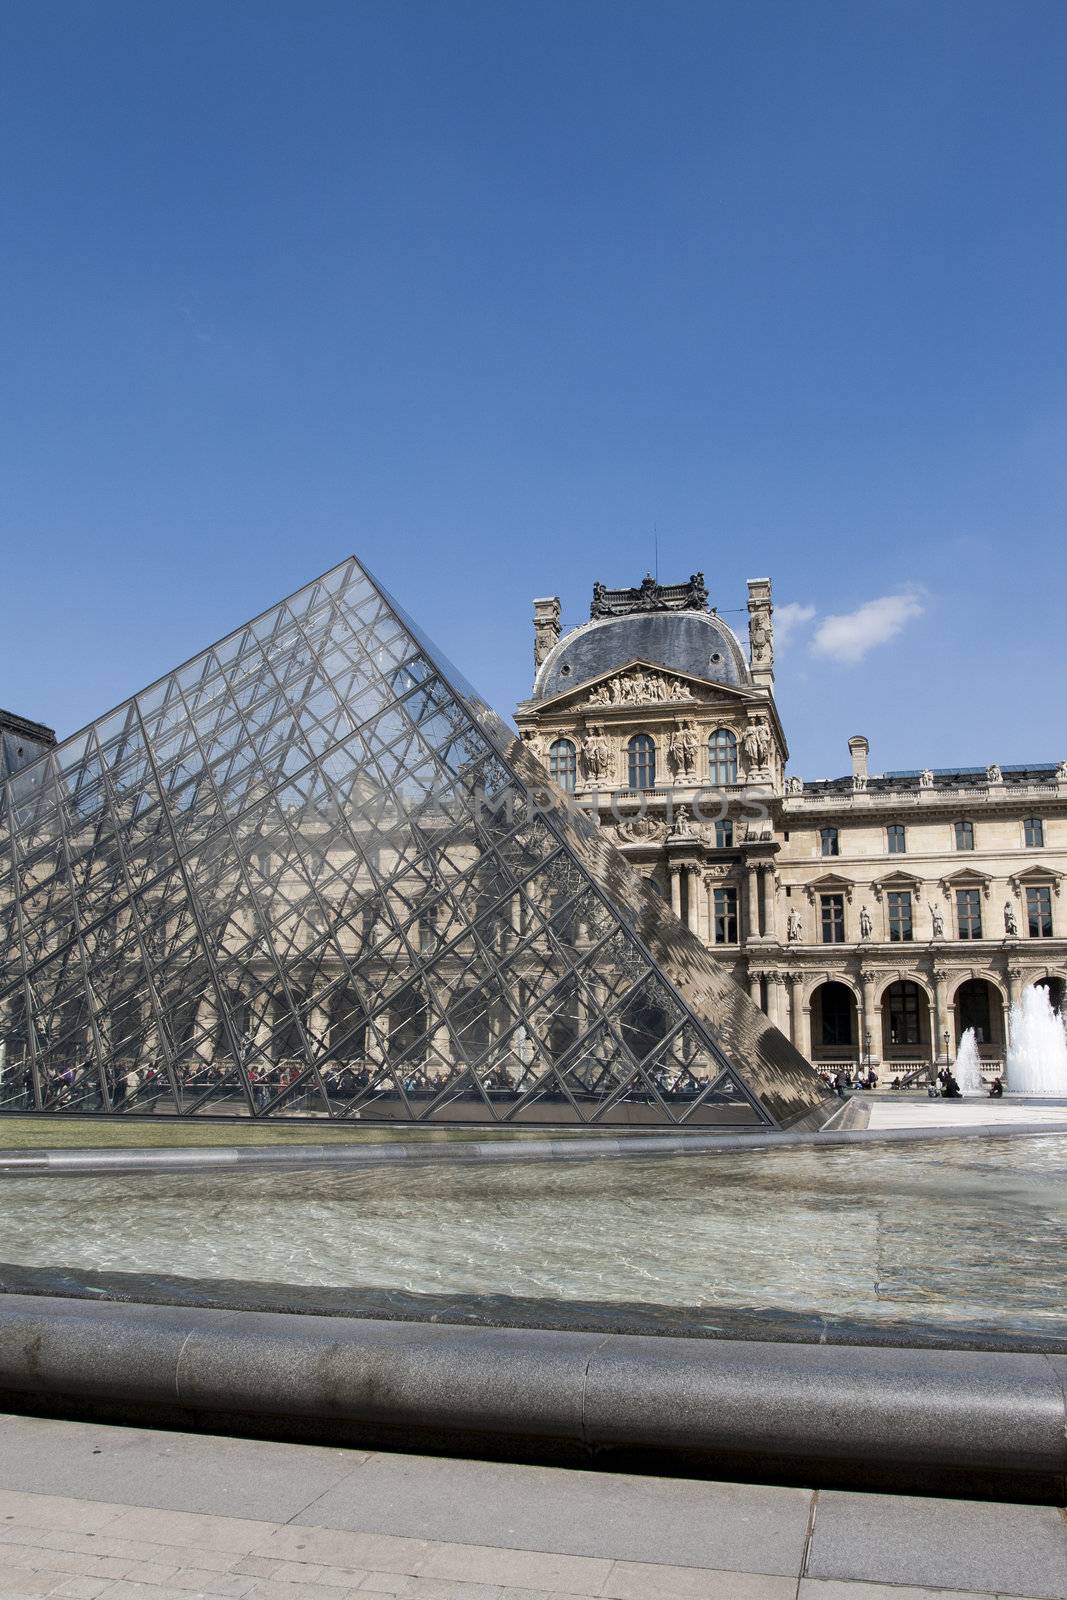 PARIS - APRIL 13, 2008. Glass Pyramid at the Louvre Museum on April 13, 2008. The Louvre is one of the world's largest museums and one of most central landmarks of Paris. Architect I.M.Pei is author of glass pyramid over a new entrance in the main court.